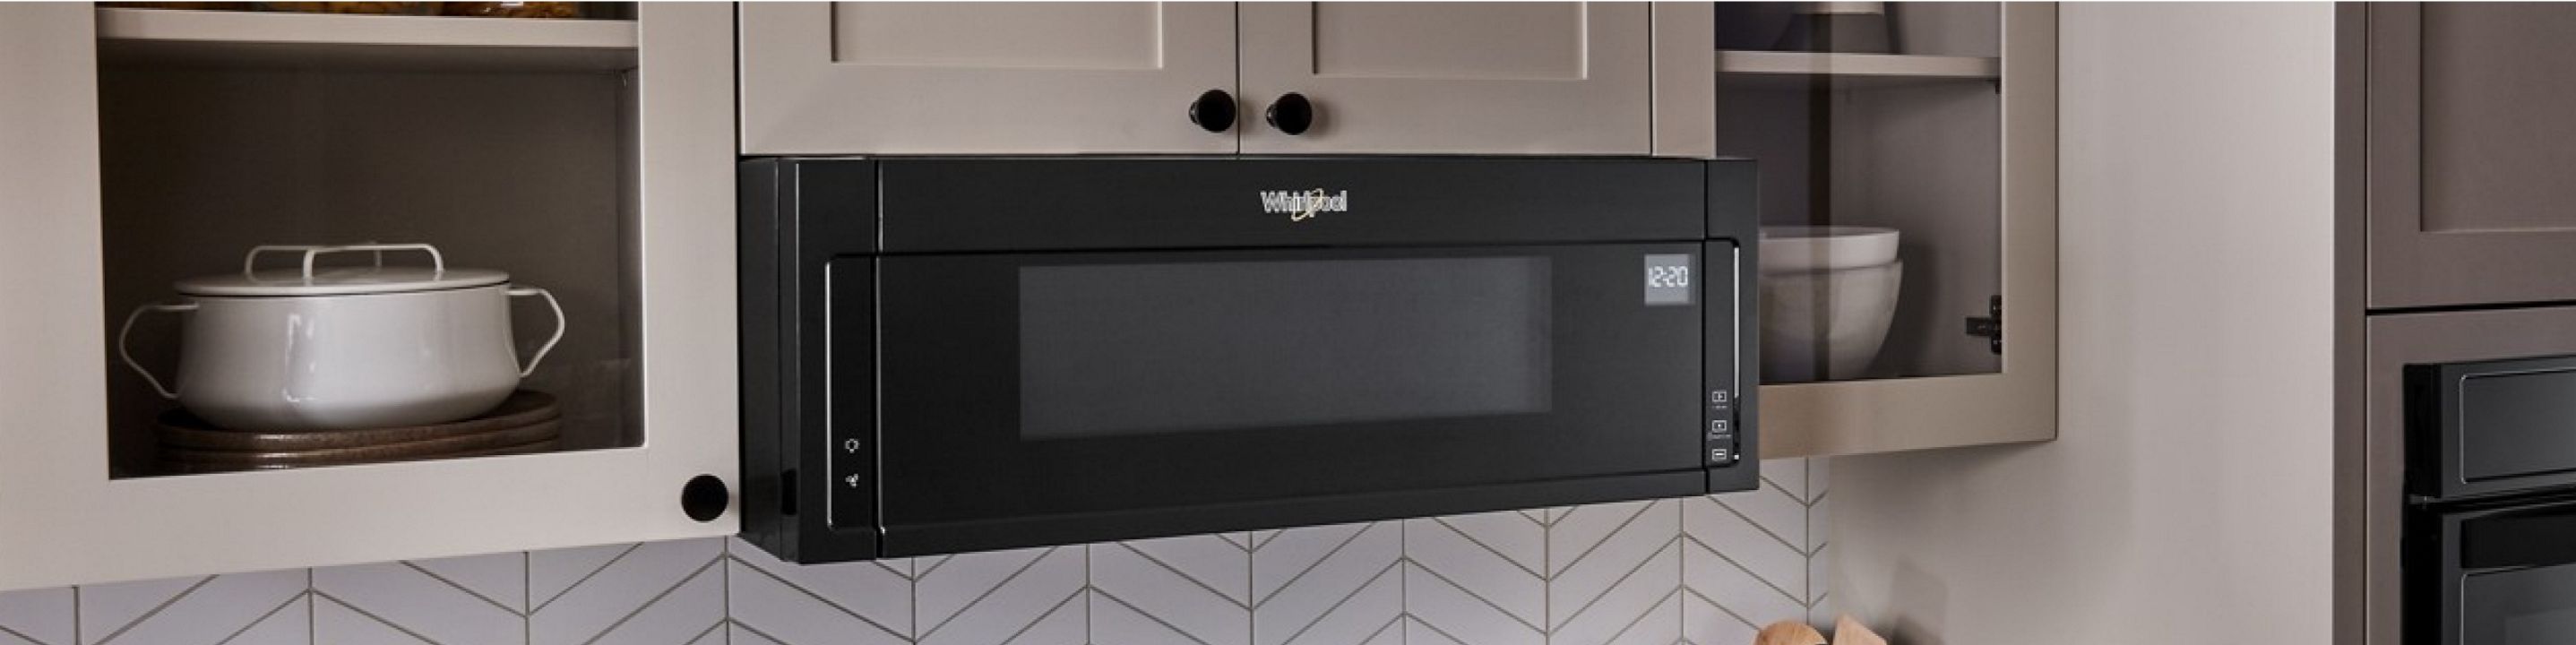 A Whirlpool® Low Profile Microwave in a sleek, white, modern kitchen